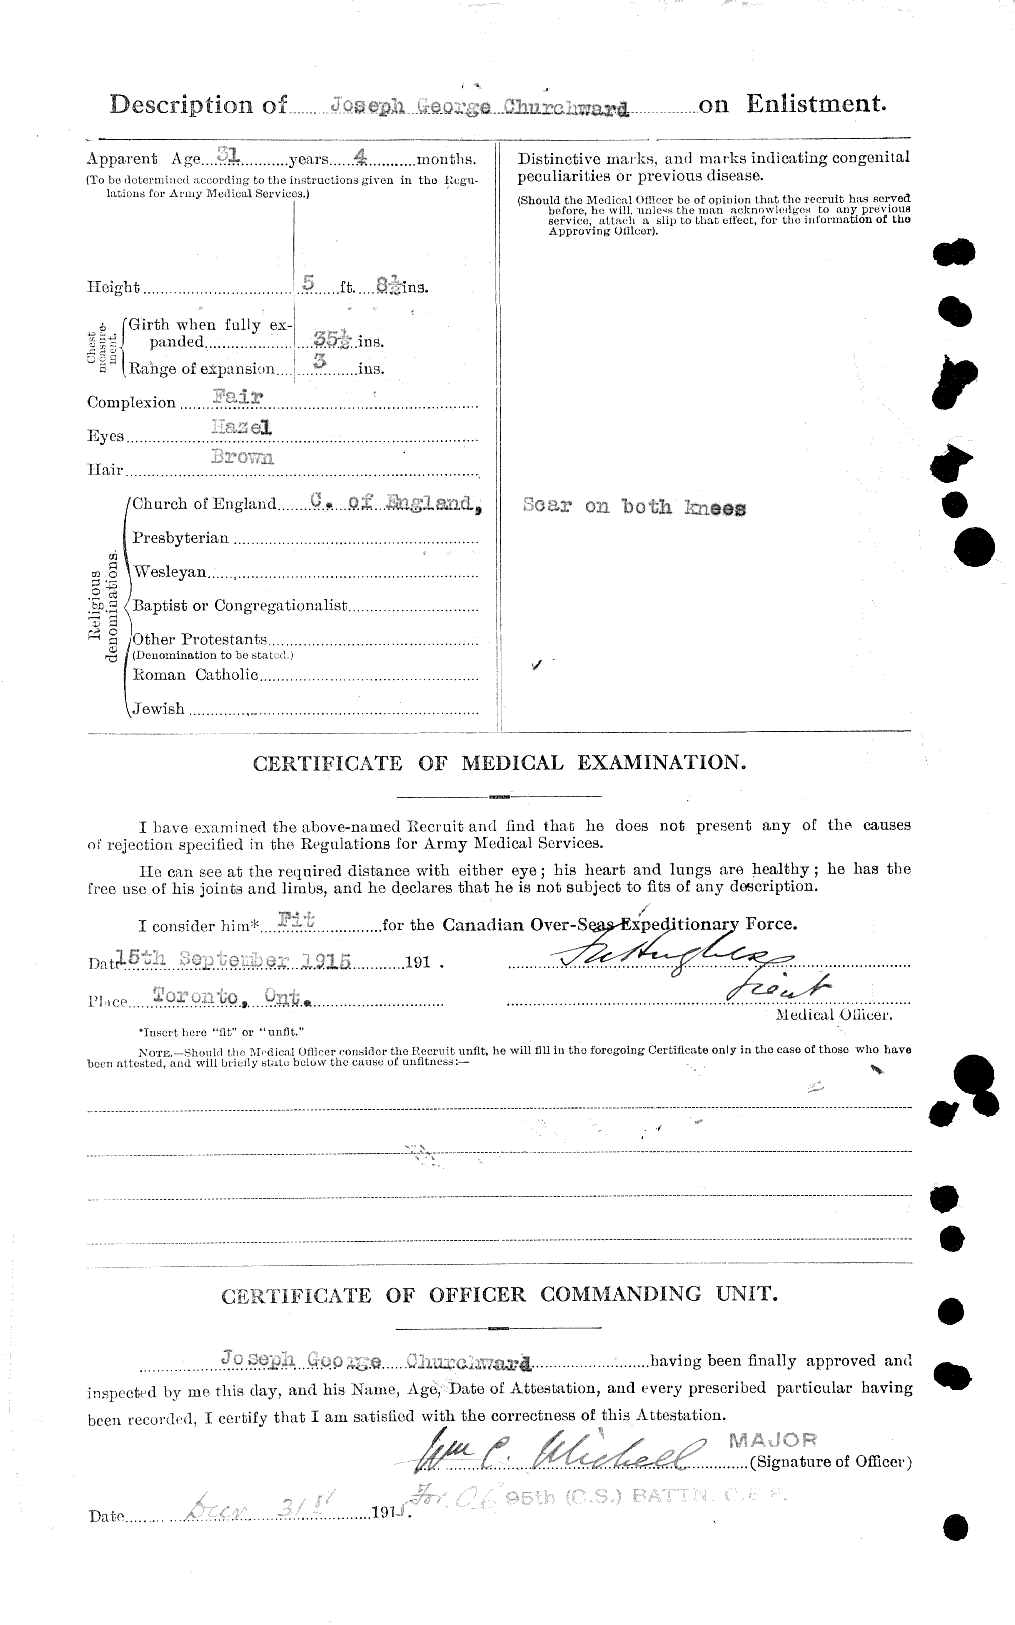 Personnel Records of the First World War - CEF 022518b